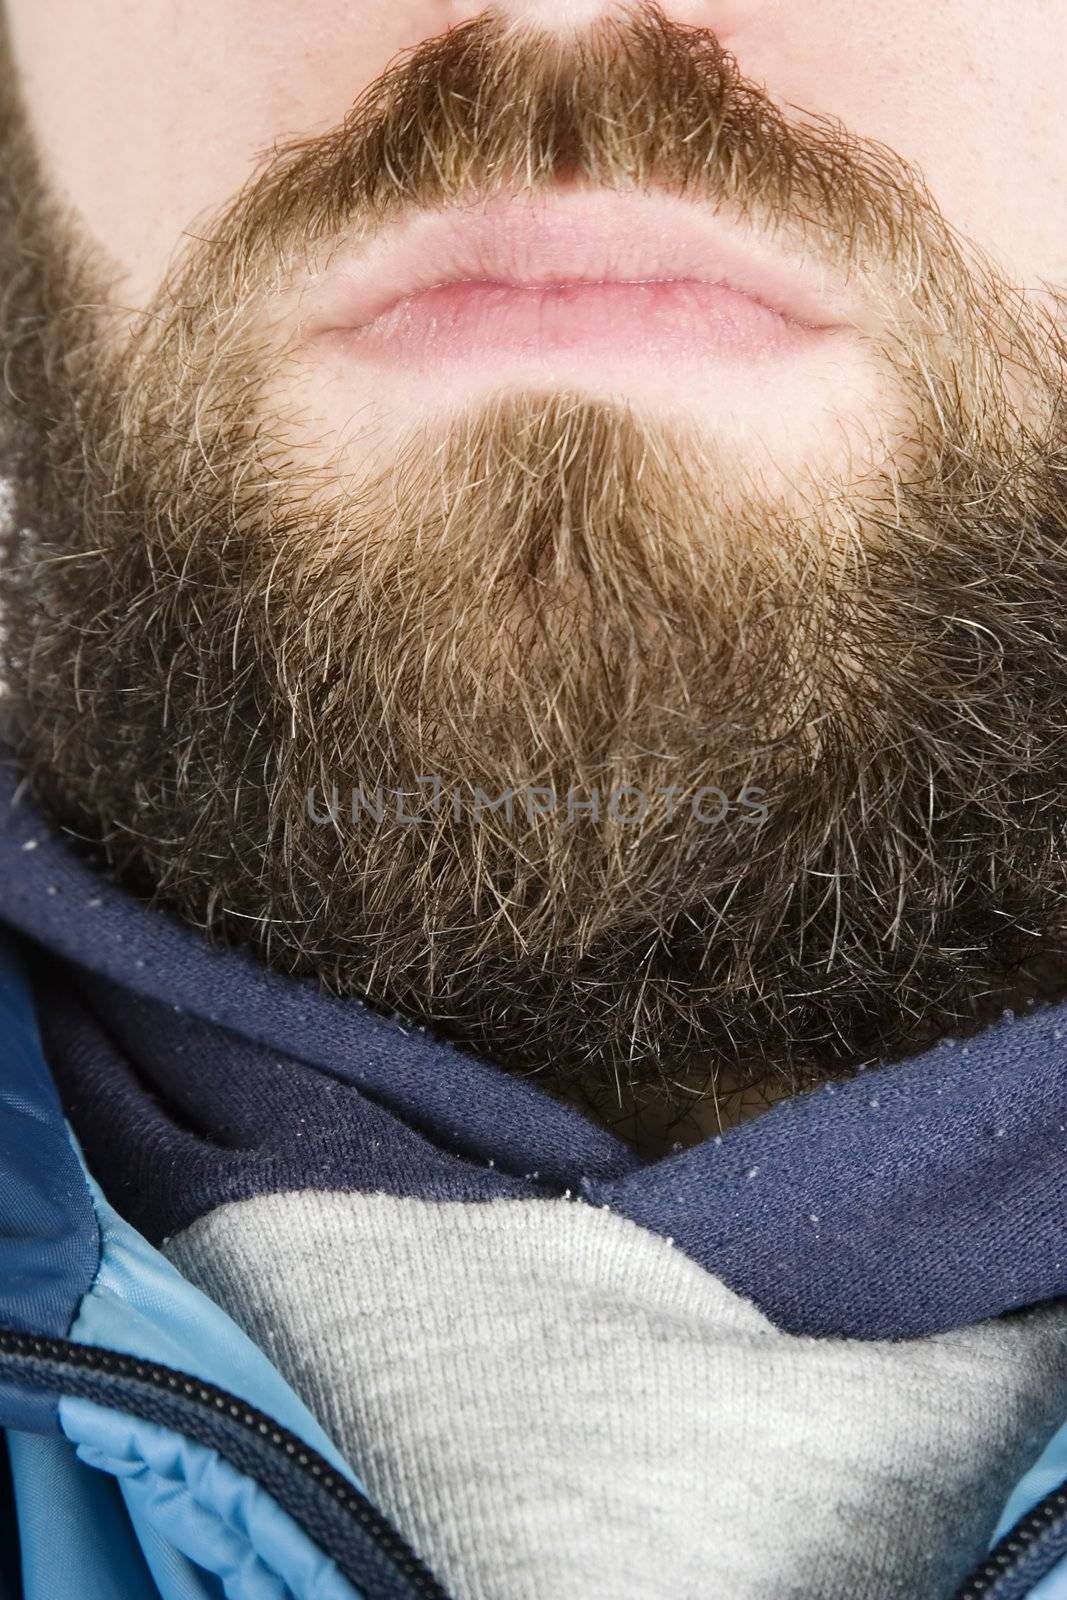 A young male with a full beard, detail image.